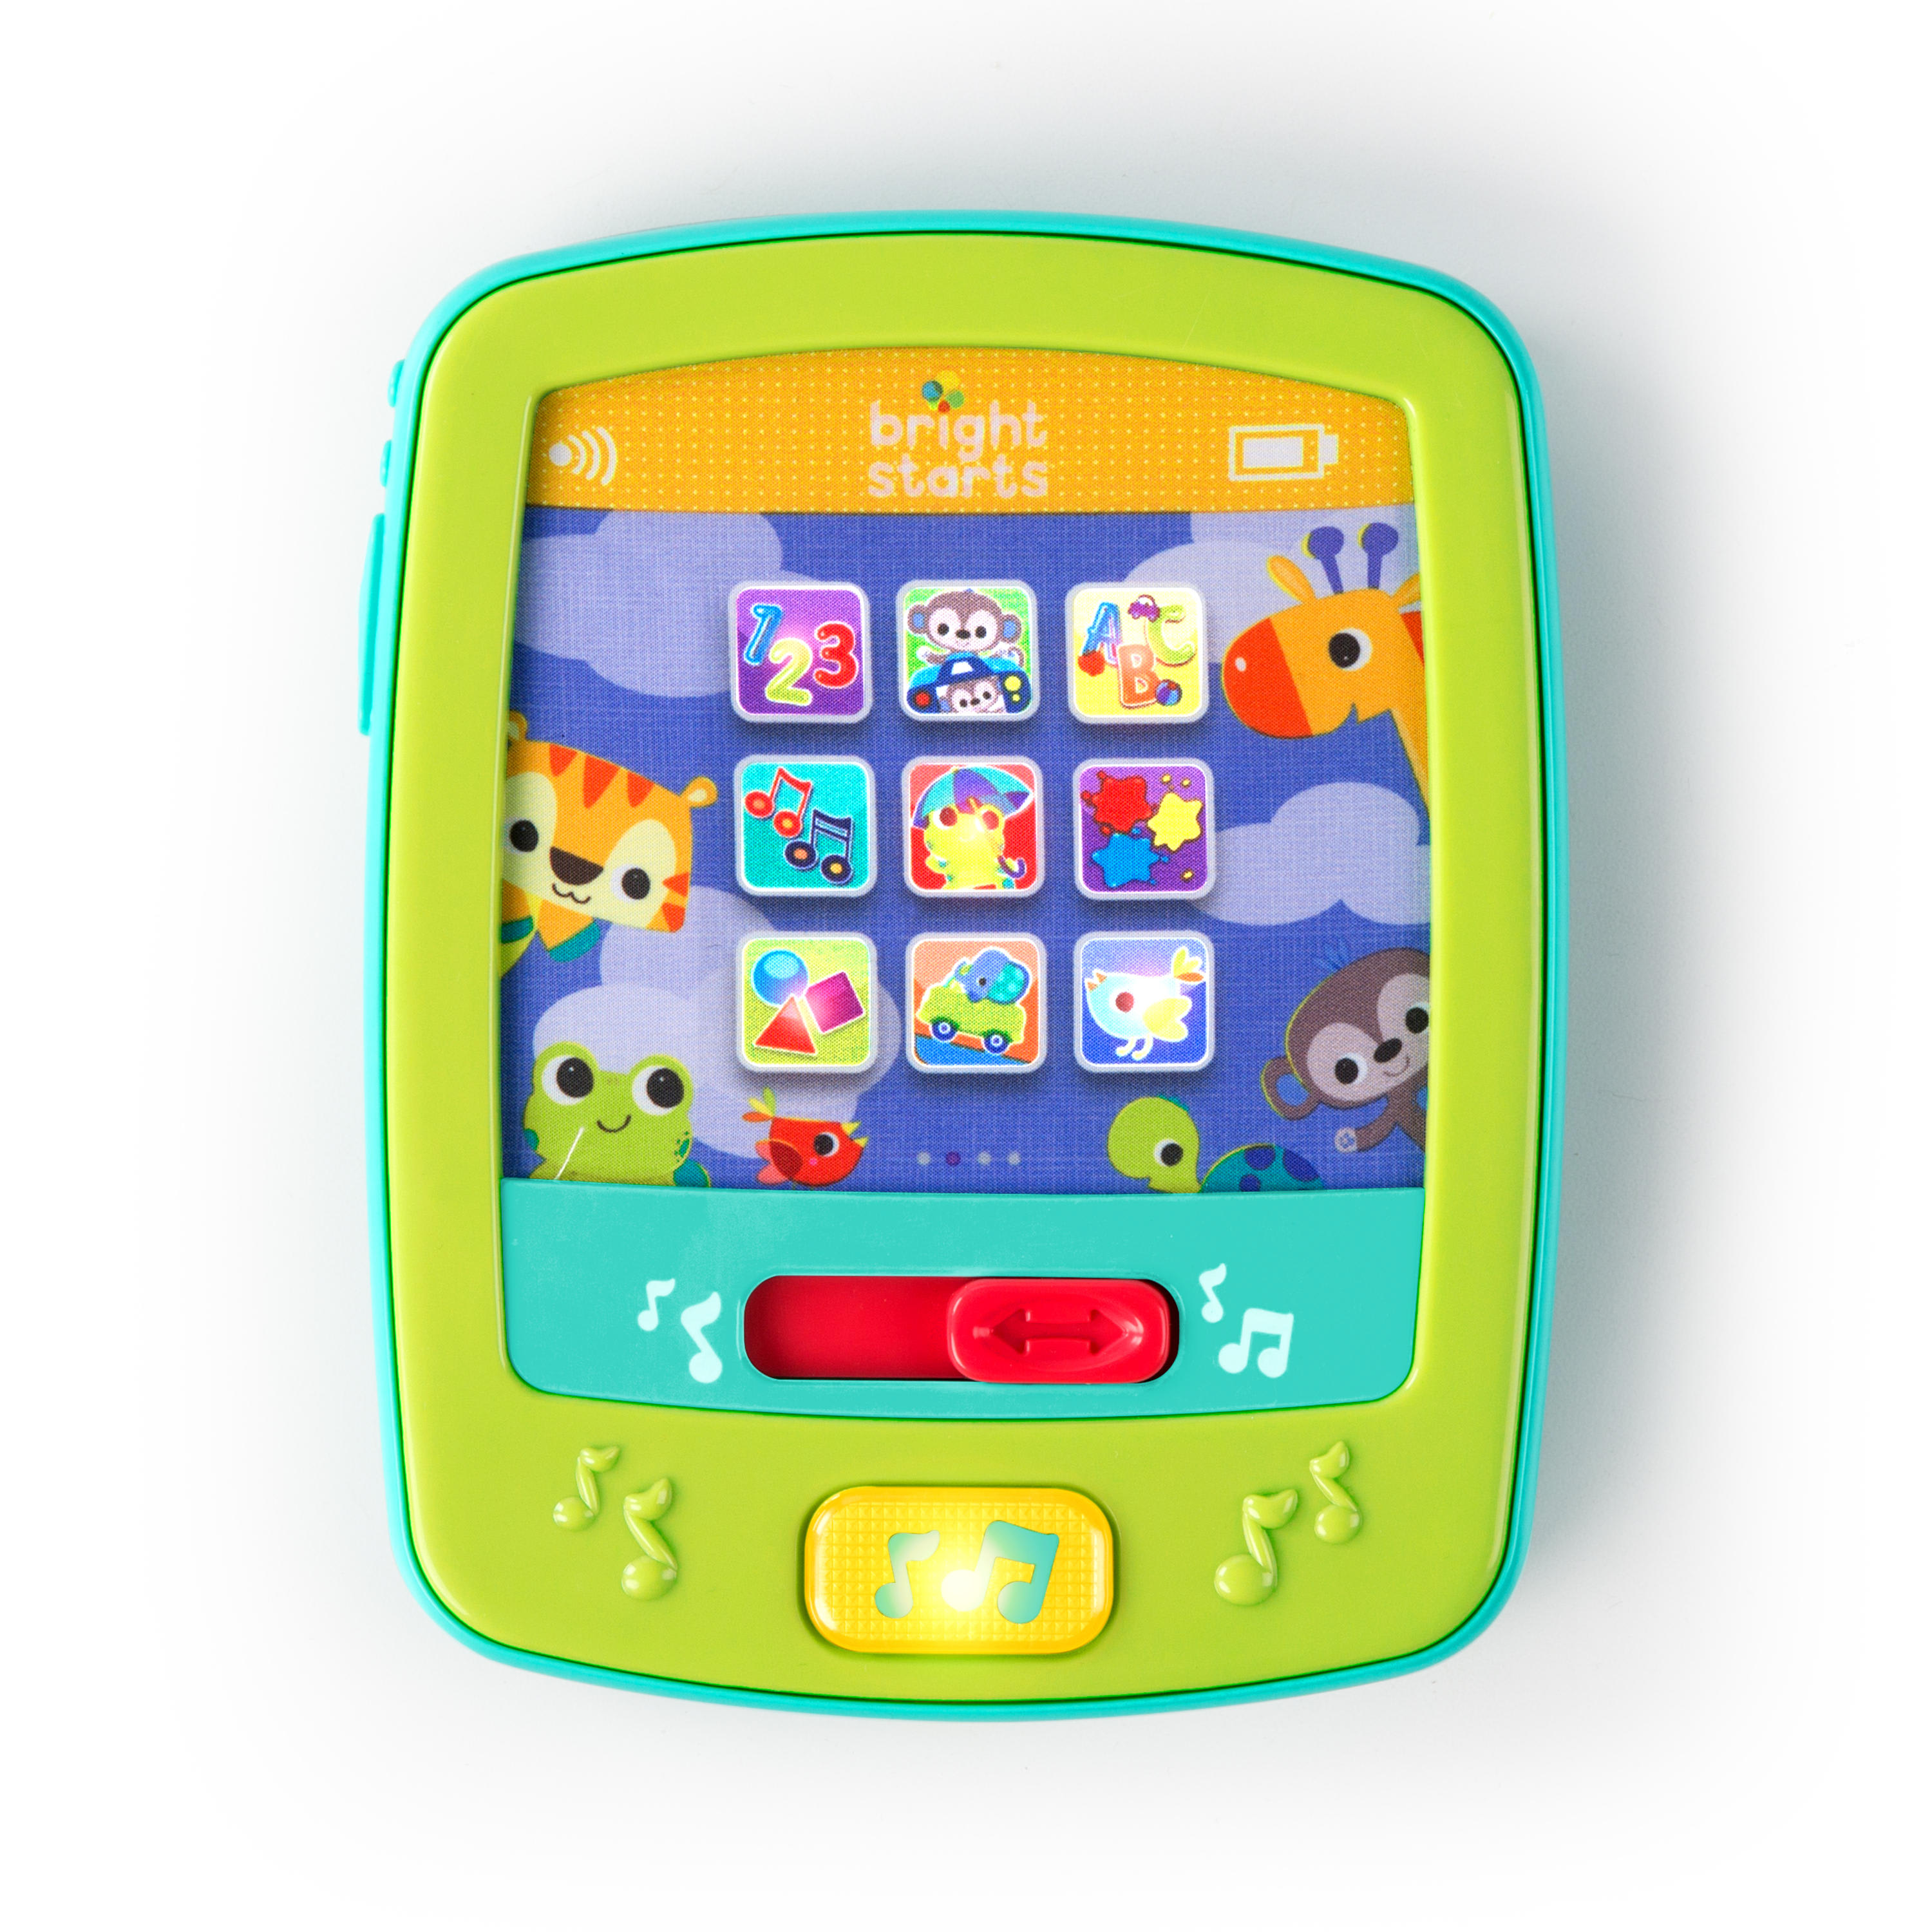 Bright Starts Lights & Sounds FunPad Musical Toy - Introduce Shapes, Colors, Numbers, Ages 3 months + - image 1 of 4